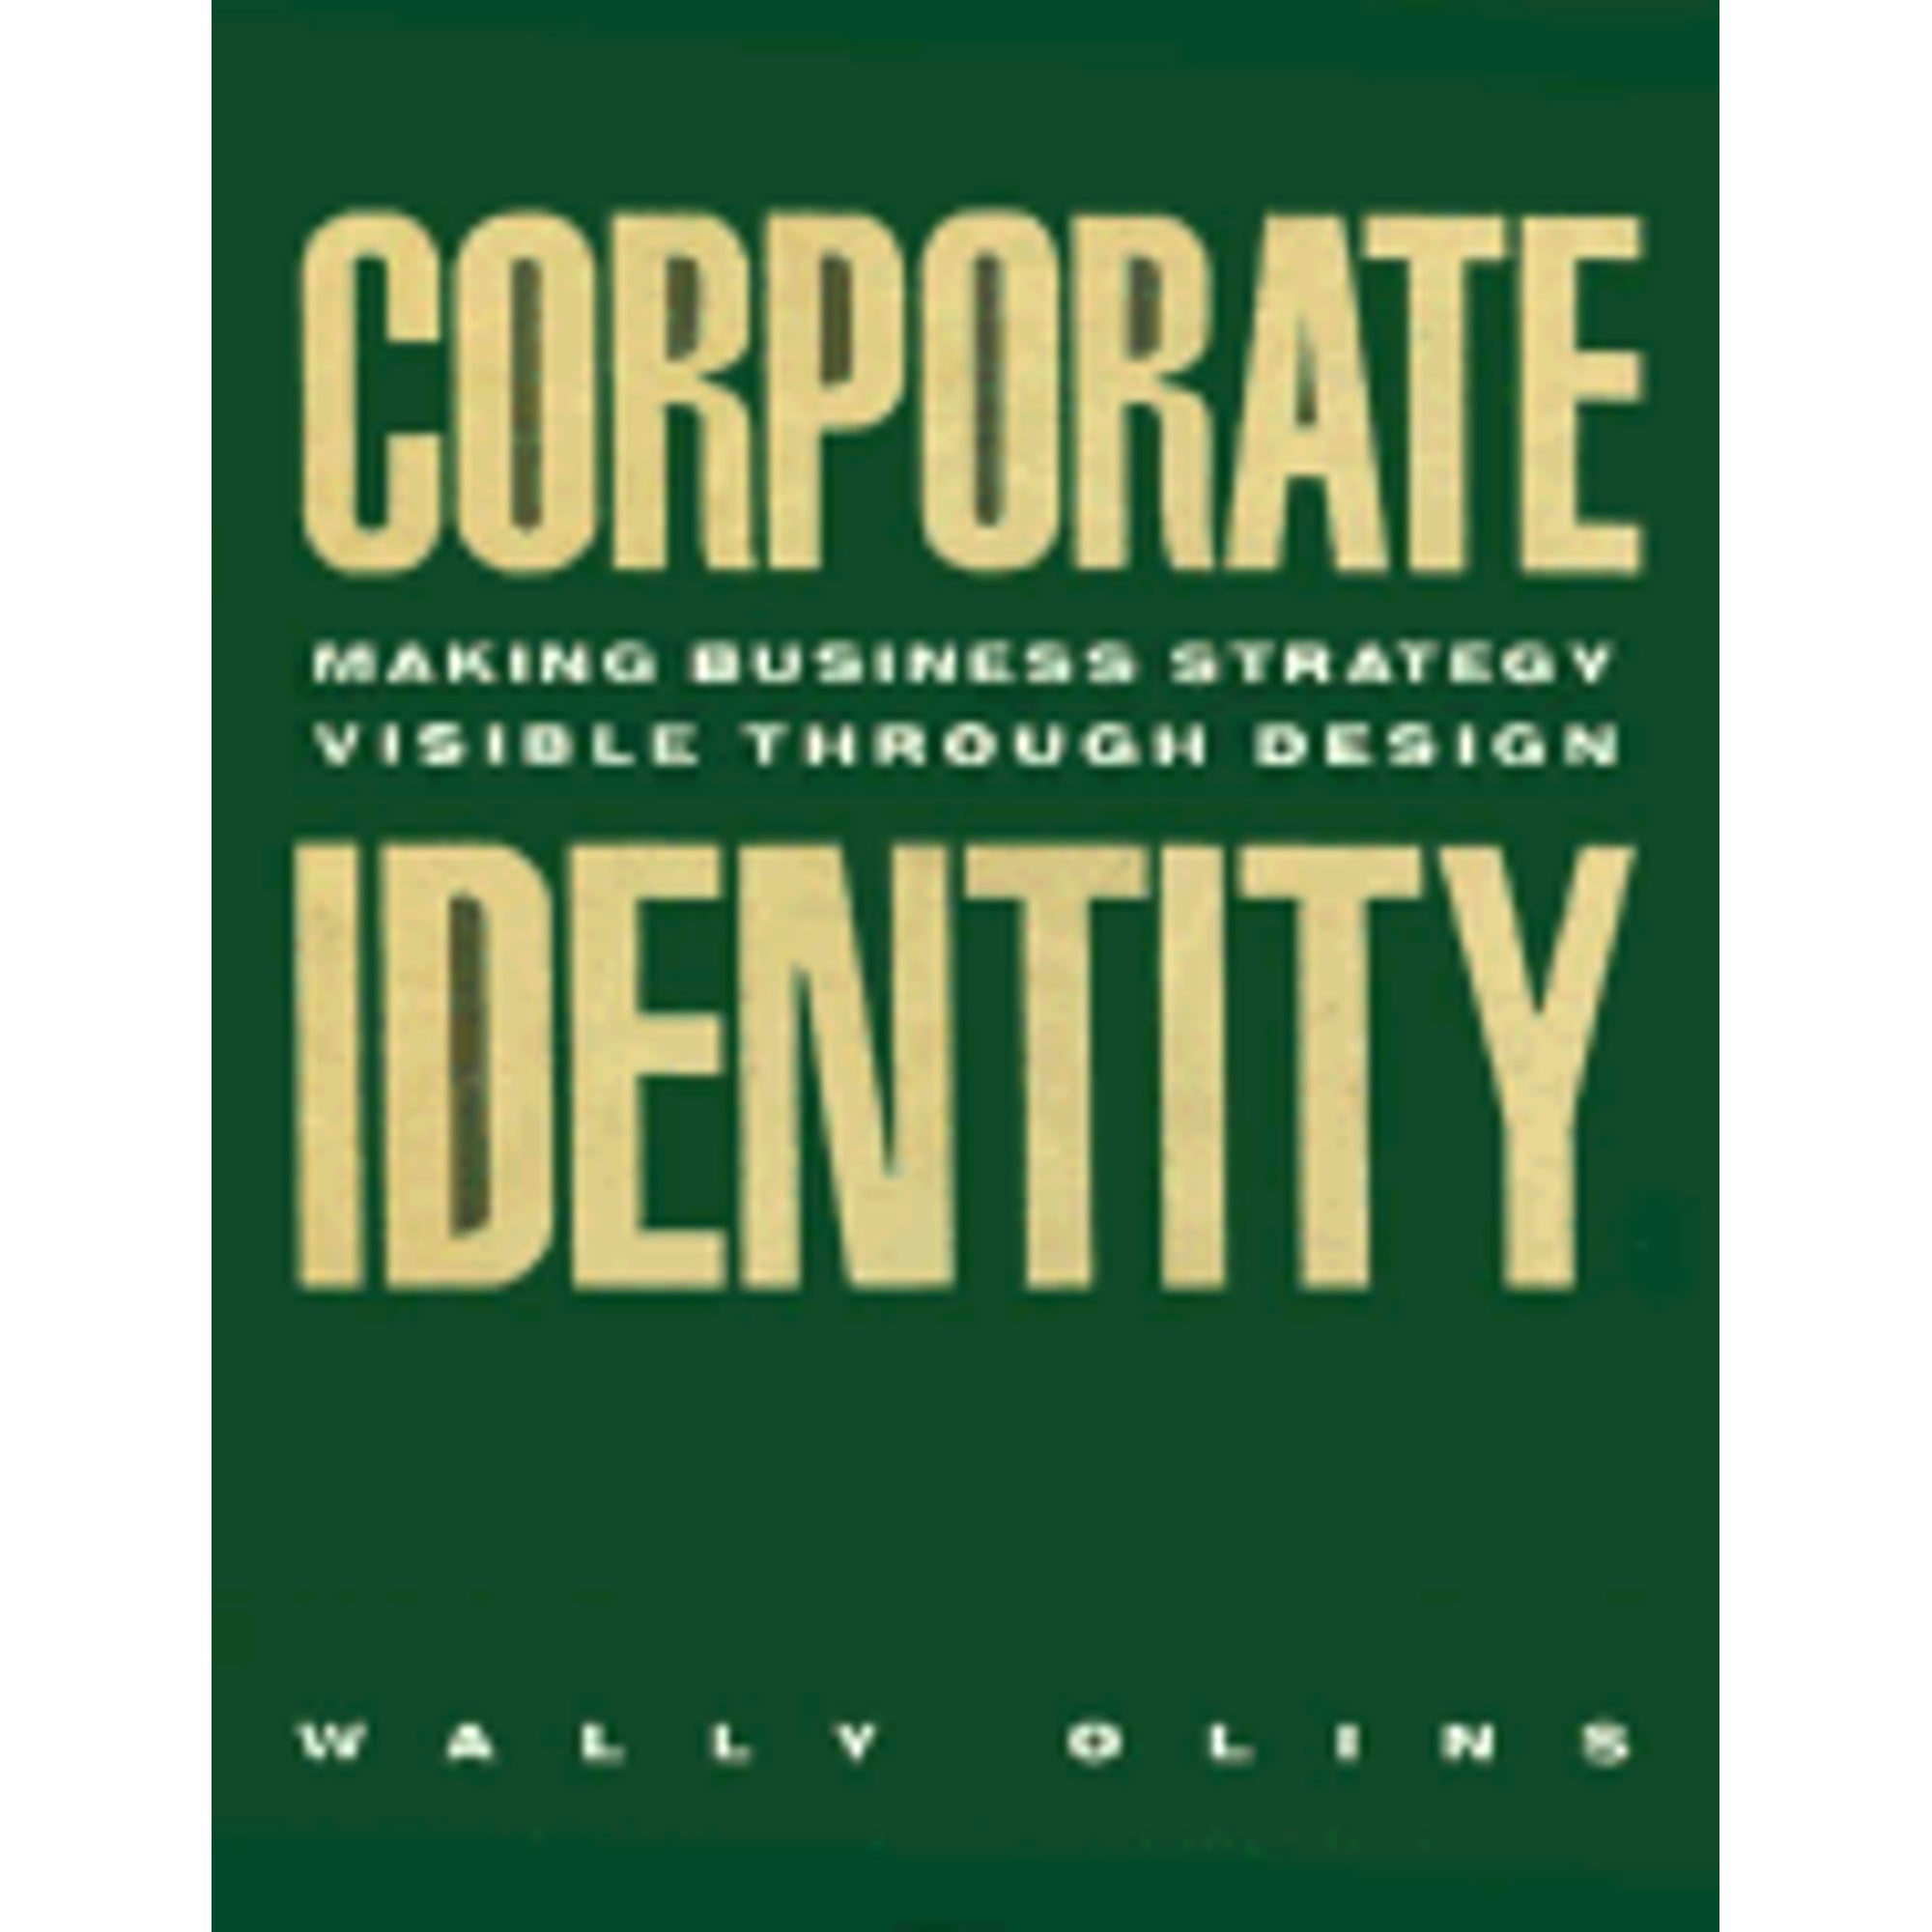 Pre-Owned Corporate Identity: Making Business Strategy Visible Through Design (Hardcover 9780875842509) by Wally Olins